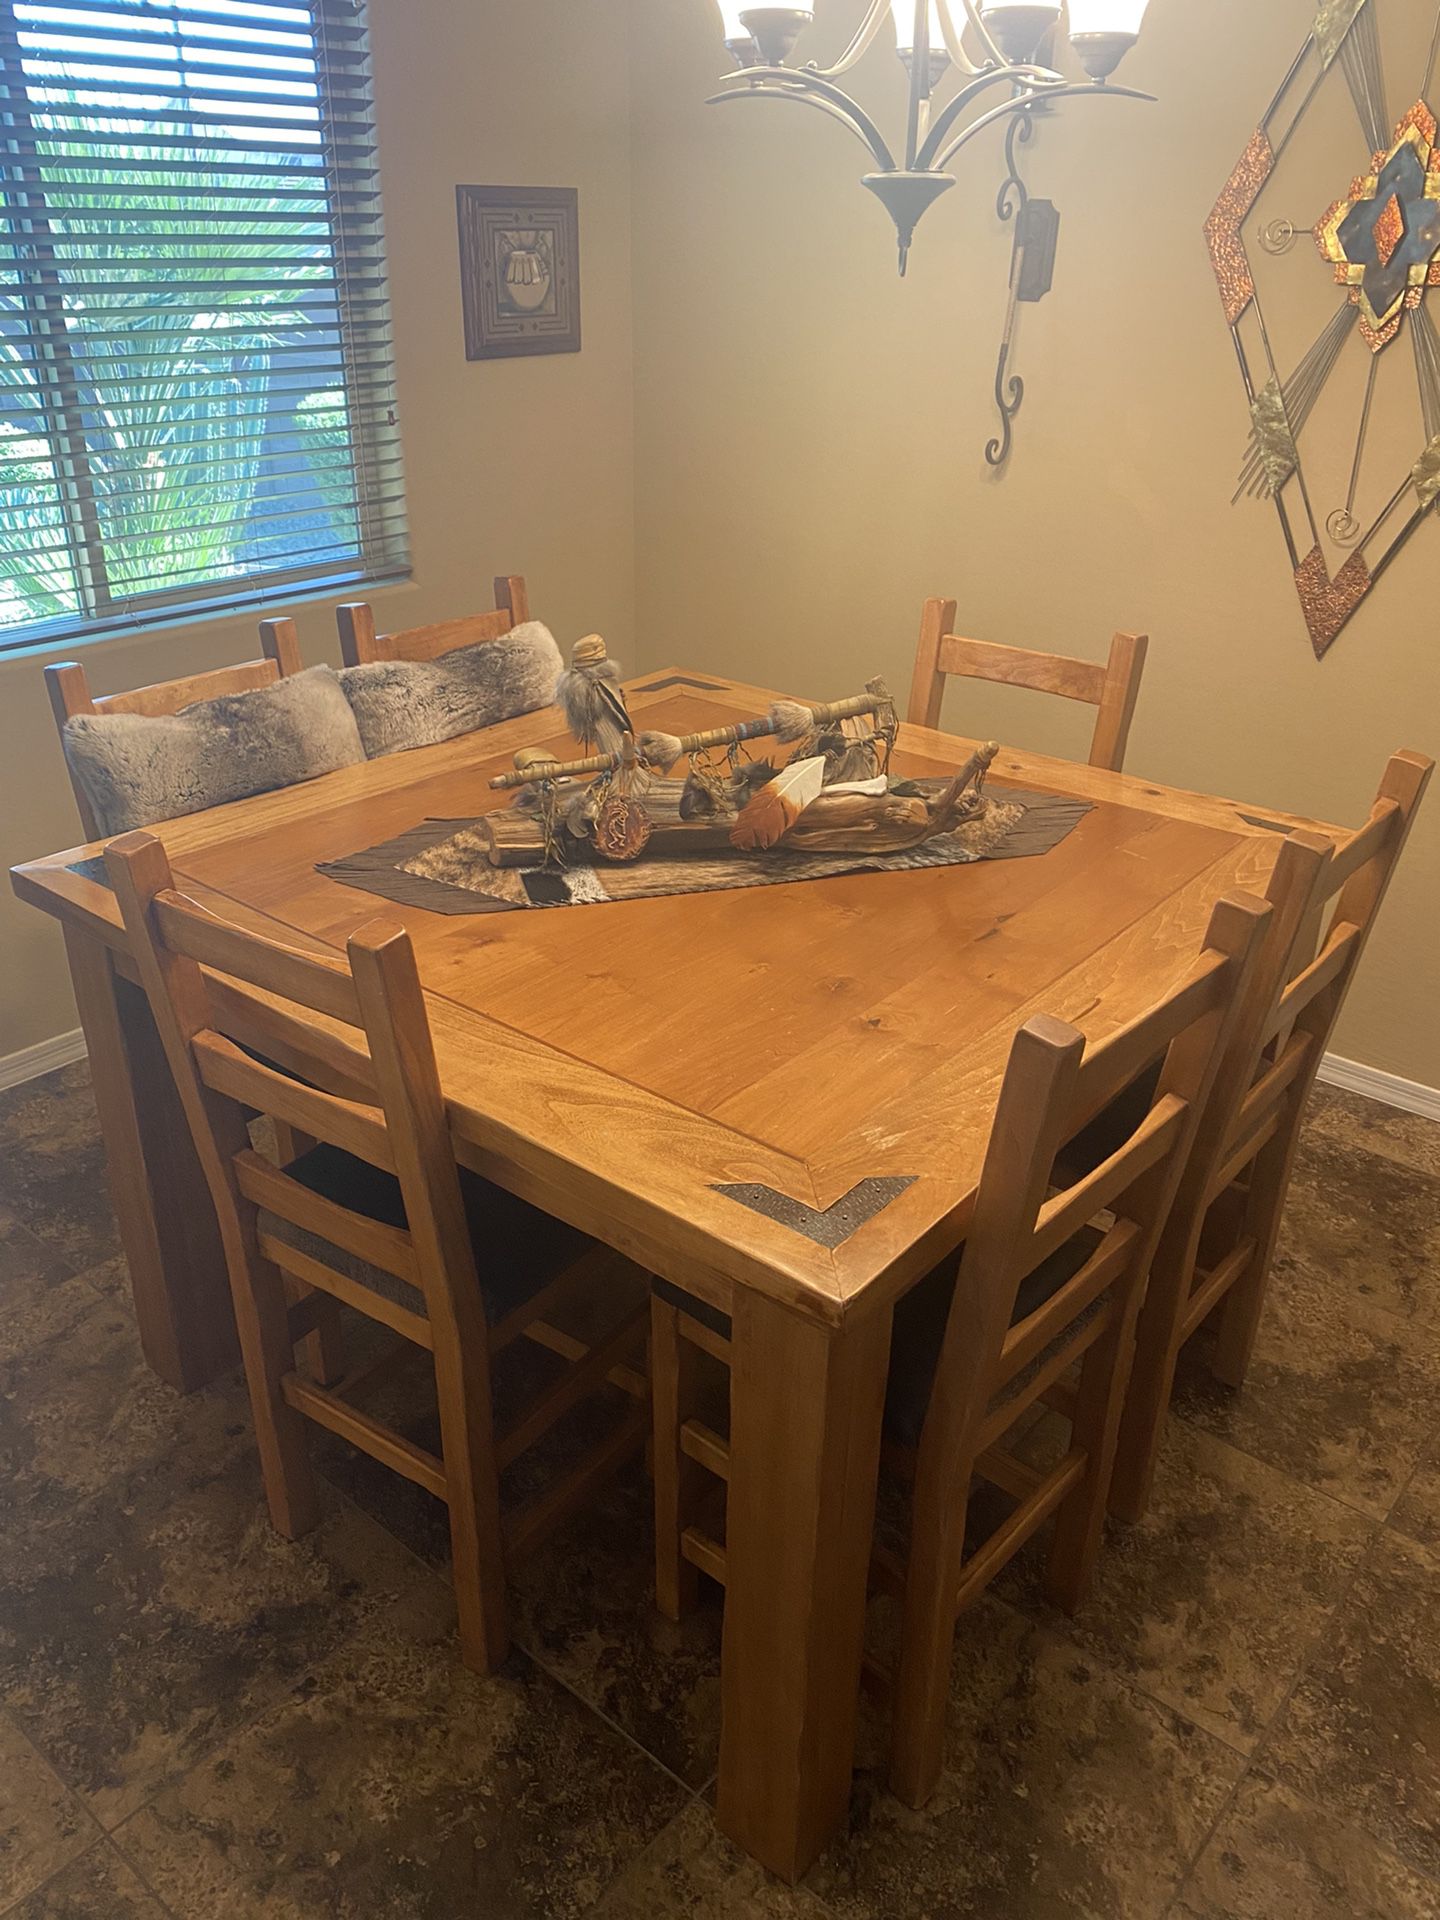 MOVING, MUST SELL - High Top Kitchen Table Set W/6 Chairs